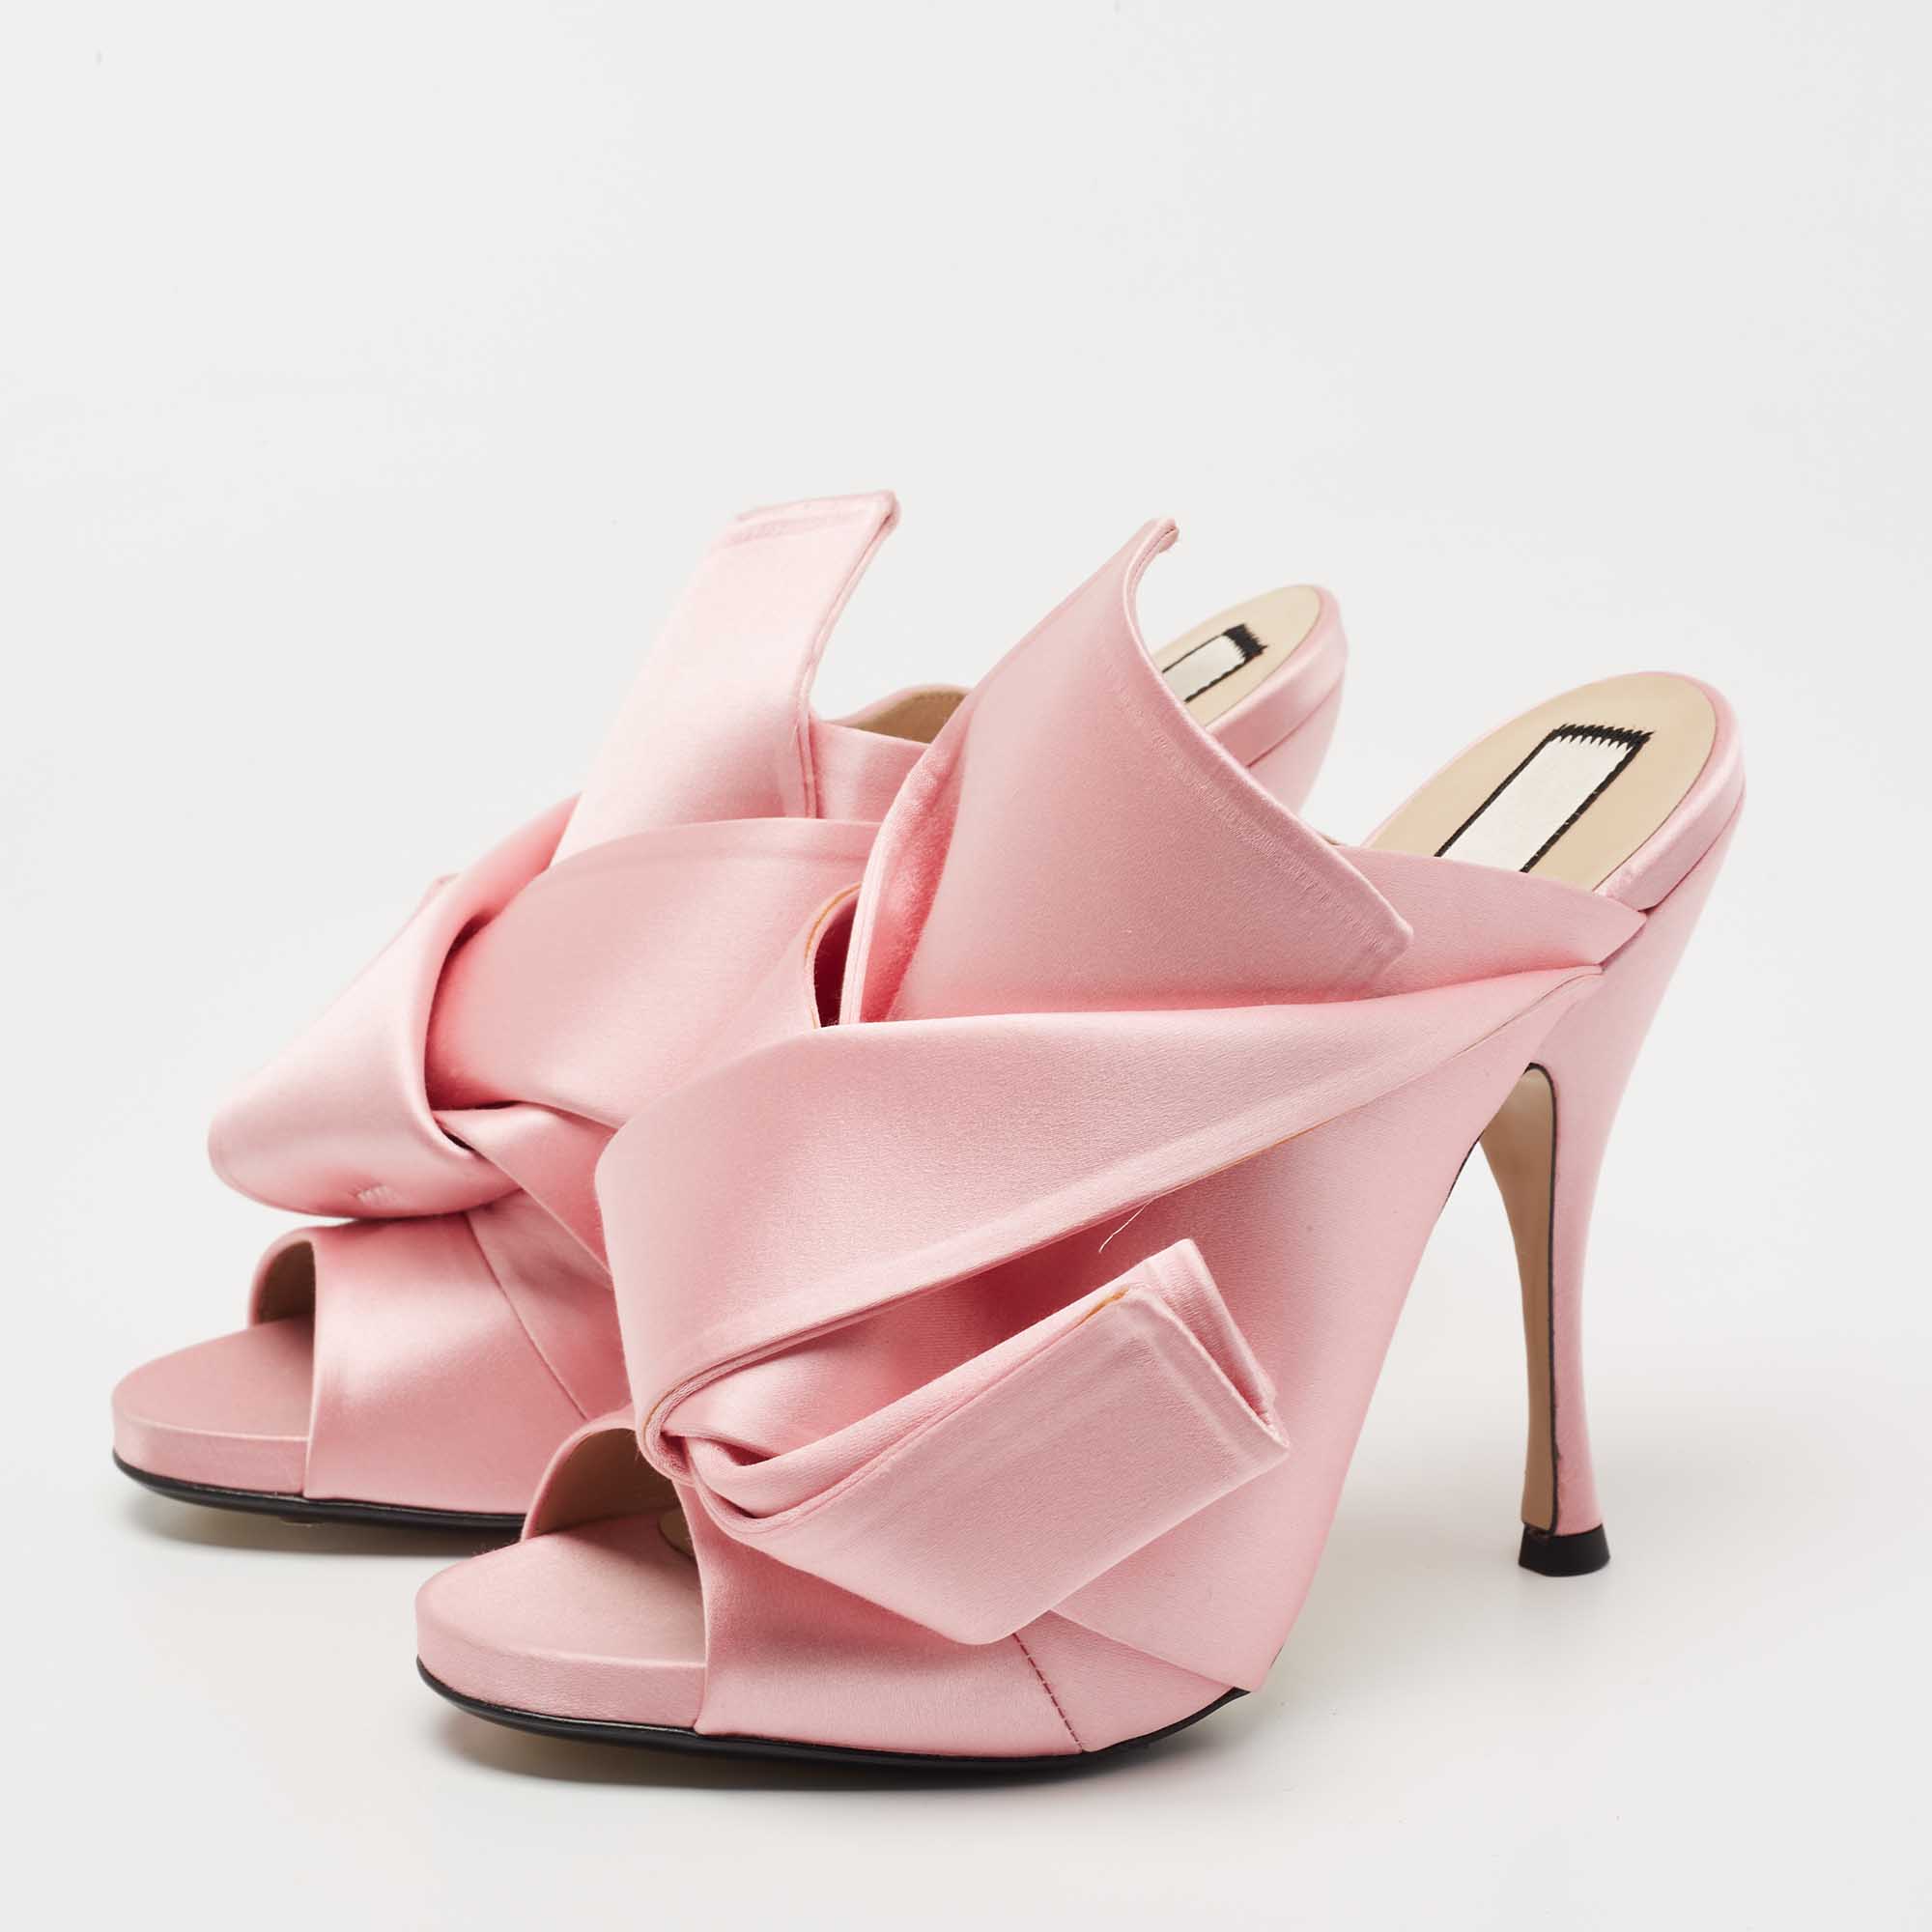 

Nº21 Pink Satin Raso Knotted Mules Size